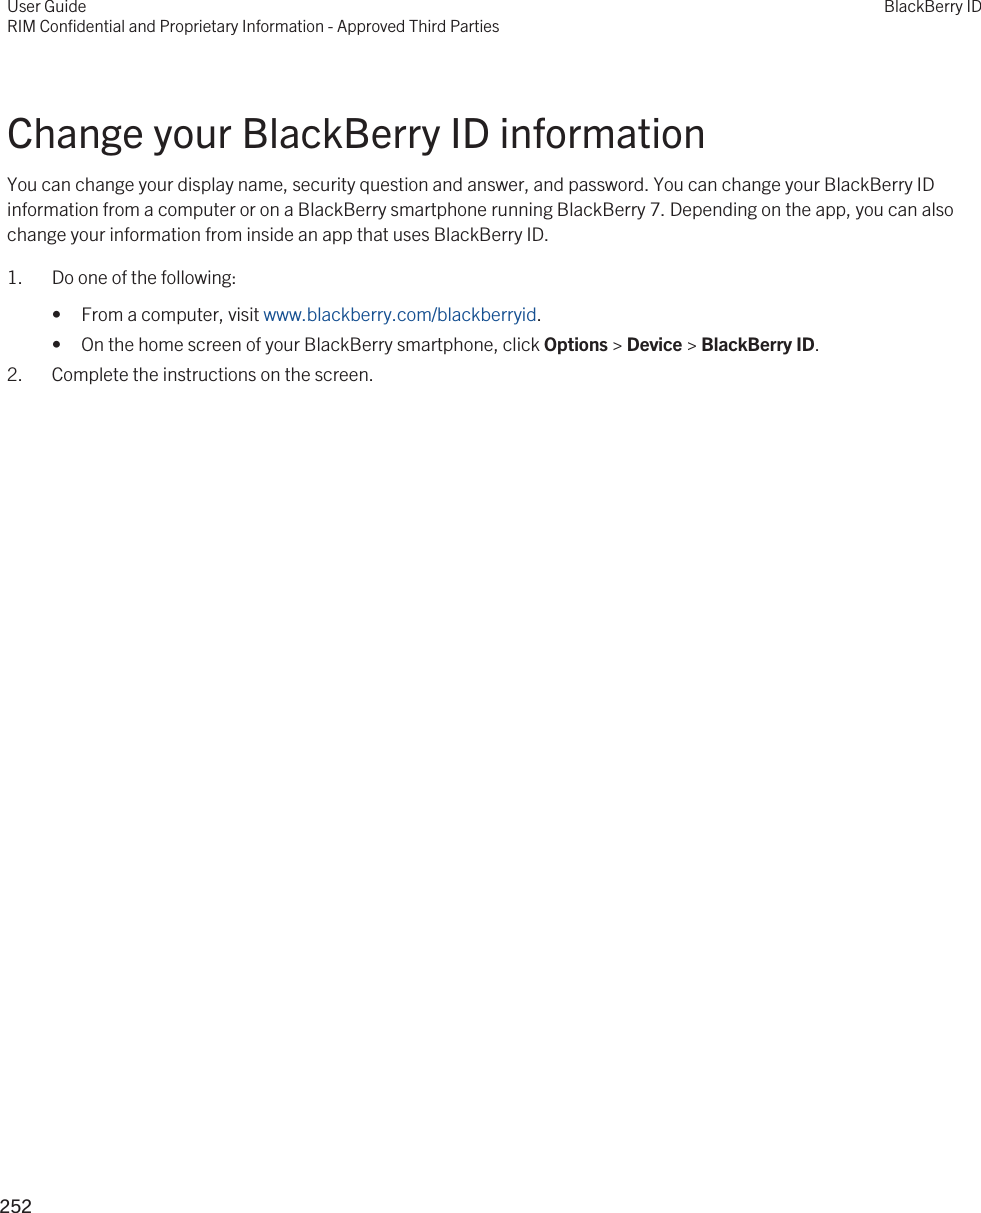 Change your BlackBerry ID informationYou can change your display name, security question and answer, and password. You can change your BlackBerry ID information from a computer or on a BlackBerry smartphone running BlackBerry 7. Depending on the app, you can also change your information from inside an app that uses BlackBerry ID.1. Do one of the following:• From a computer, visit www.blackberry.com/blackberryid.• On the home screen of your BlackBerry smartphone, click Options &gt; Device &gt; BlackBerry ID.2. Complete the instructions on the screen.User GuideRIM Confidential and Proprietary Information - Approved Third PartiesBlackBerry ID252 